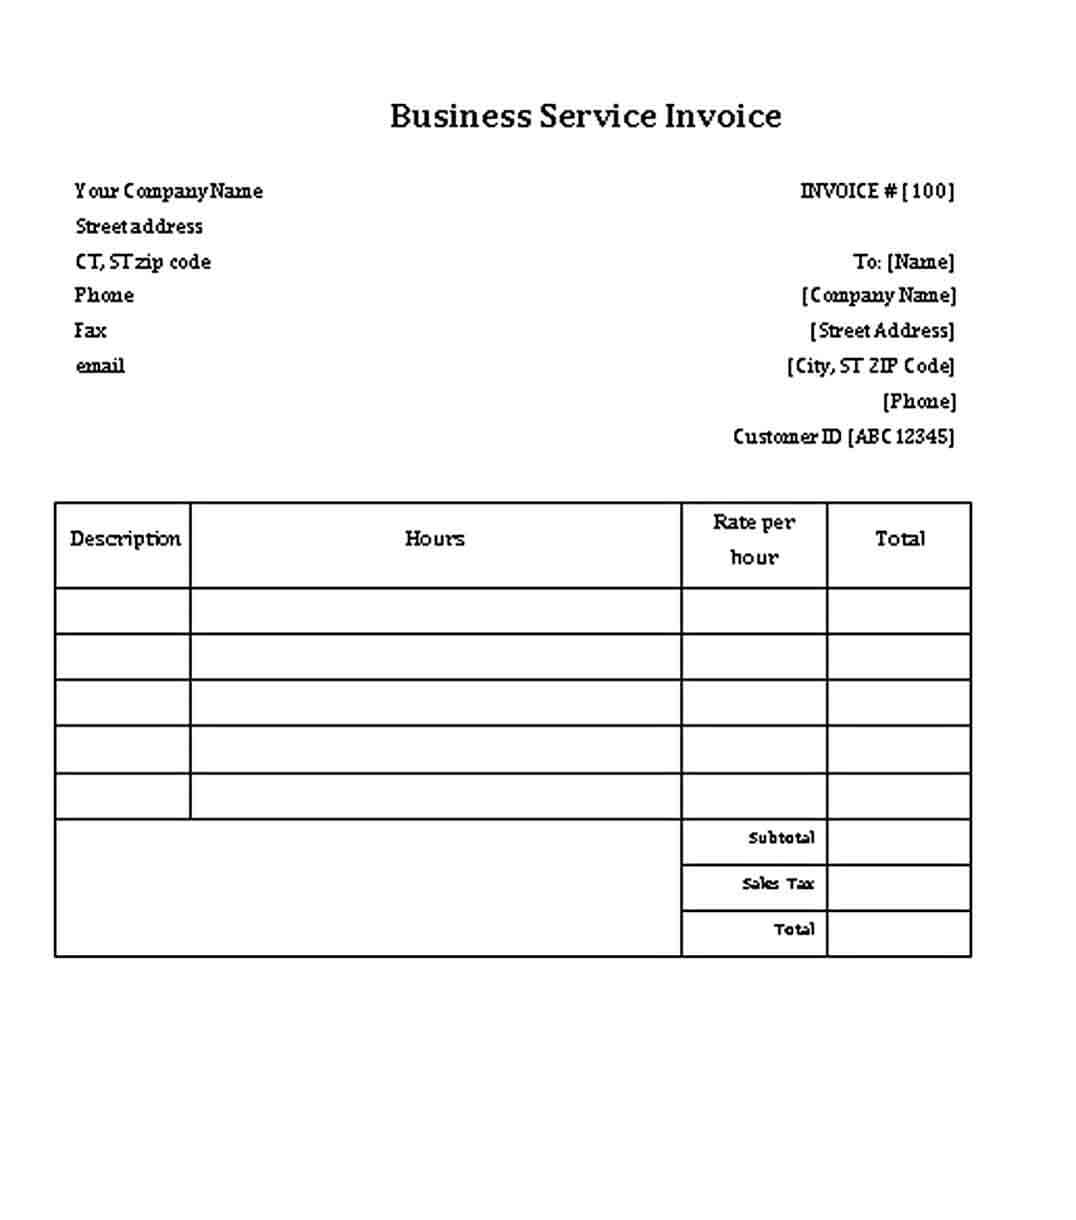 Sample Business Invoice Receipt Free Download